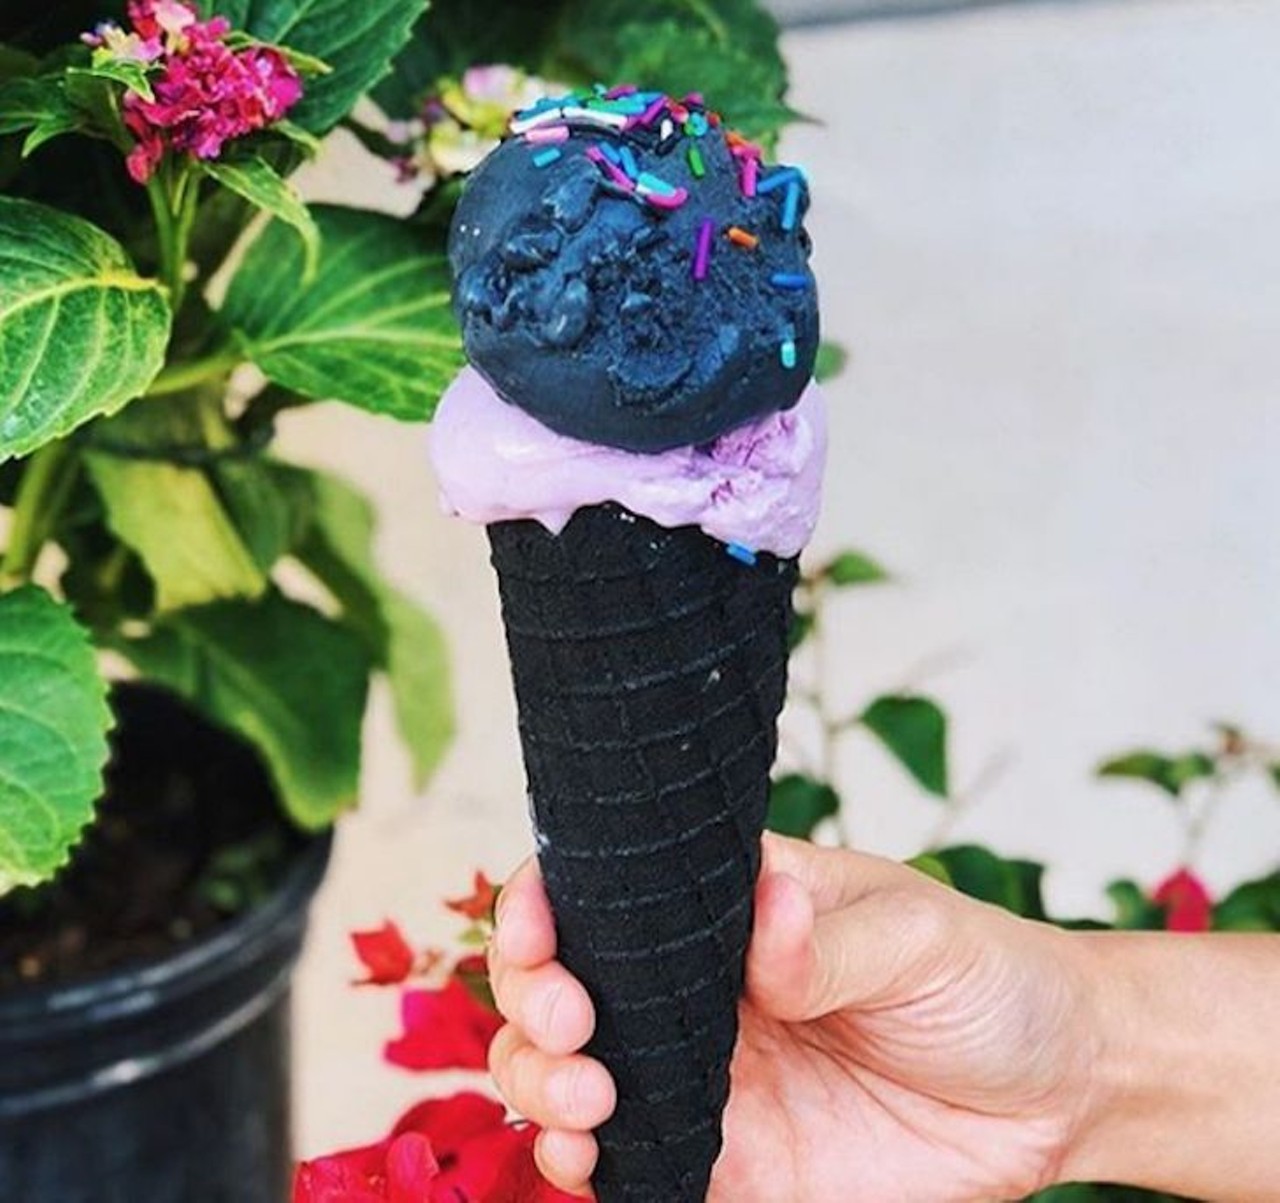 The Greenery Creamery  
420 E Church St, 407-286-1084
Some of the best vegan ice cream is being served up in downtown Orlando by The Greenery Creamery. The new ice cream boutique located in Thornton Park has unique flavors, both dairy-based along with a couple vegan-friendly options. 
Photo via The Greenery Creamery/Instagram